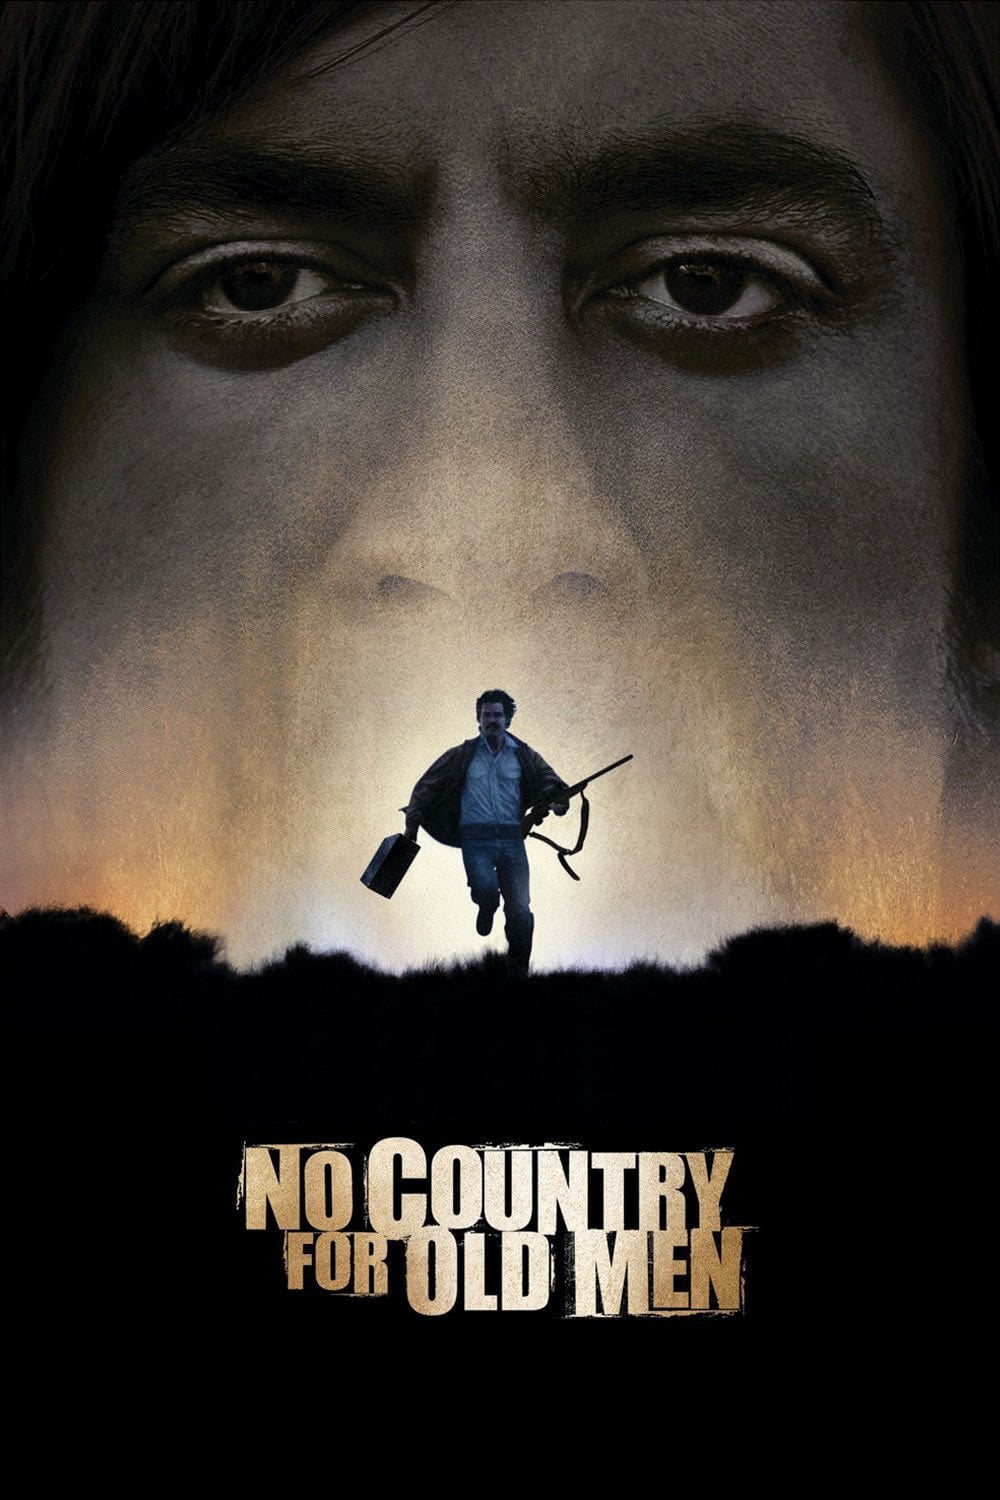 A story that can gain more clarity through a prequel: No Country for Old Men